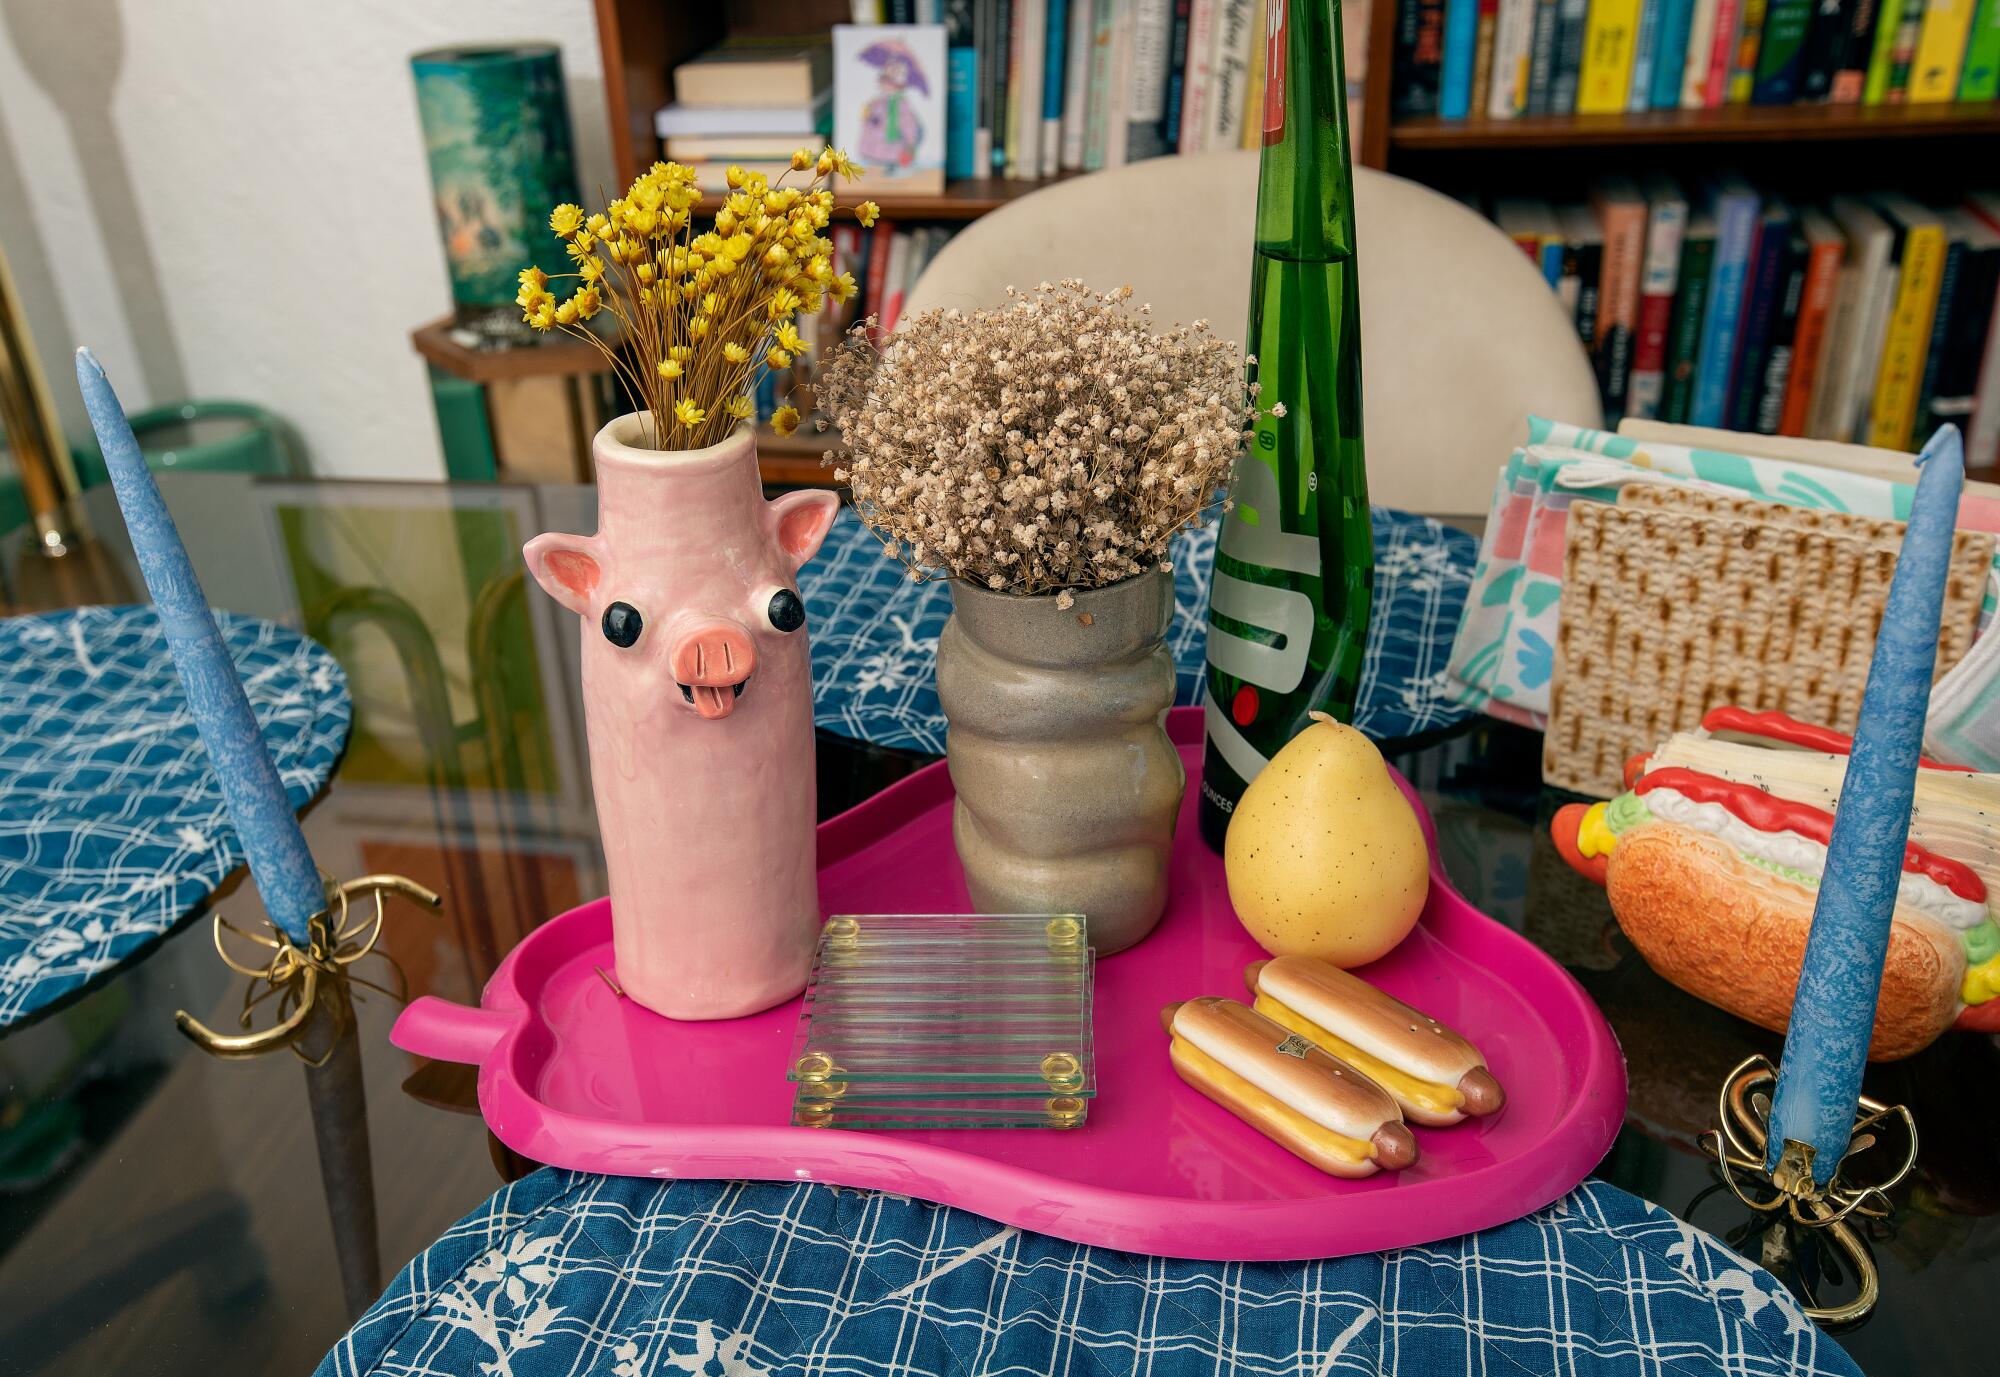 Vases and other household decorations on a dining room table.